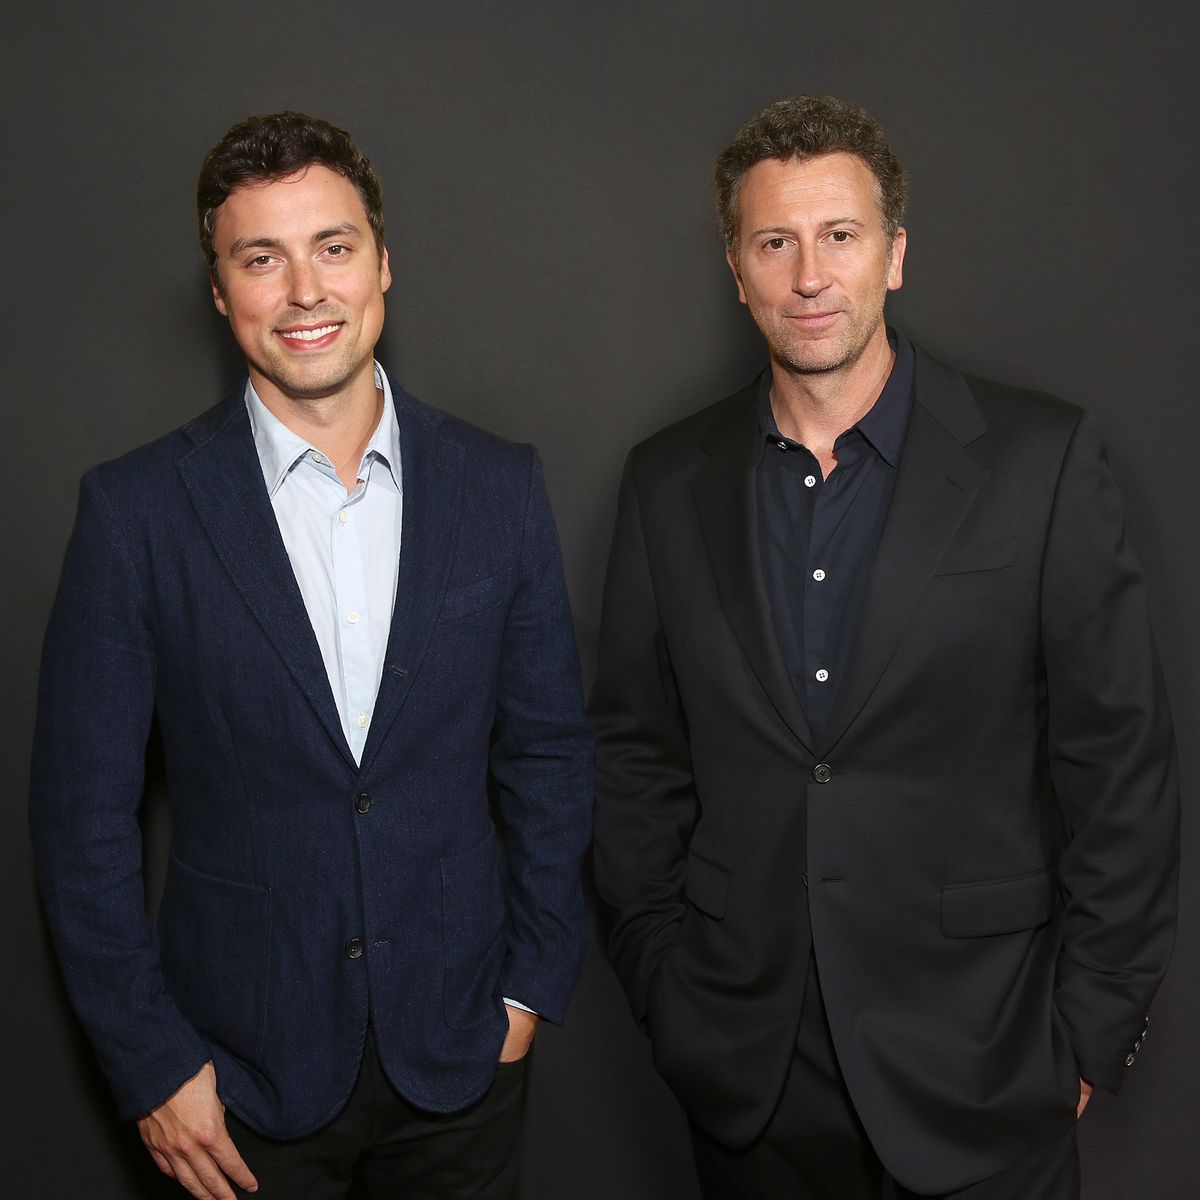 los angeles, california july 10 producers john francis daley and jonathan goldstein attend the premiere of 20th century fox's "stuber" at regal cinemas la live on july 10, 2019 in los angeles, california photo by jesse grantgetty images